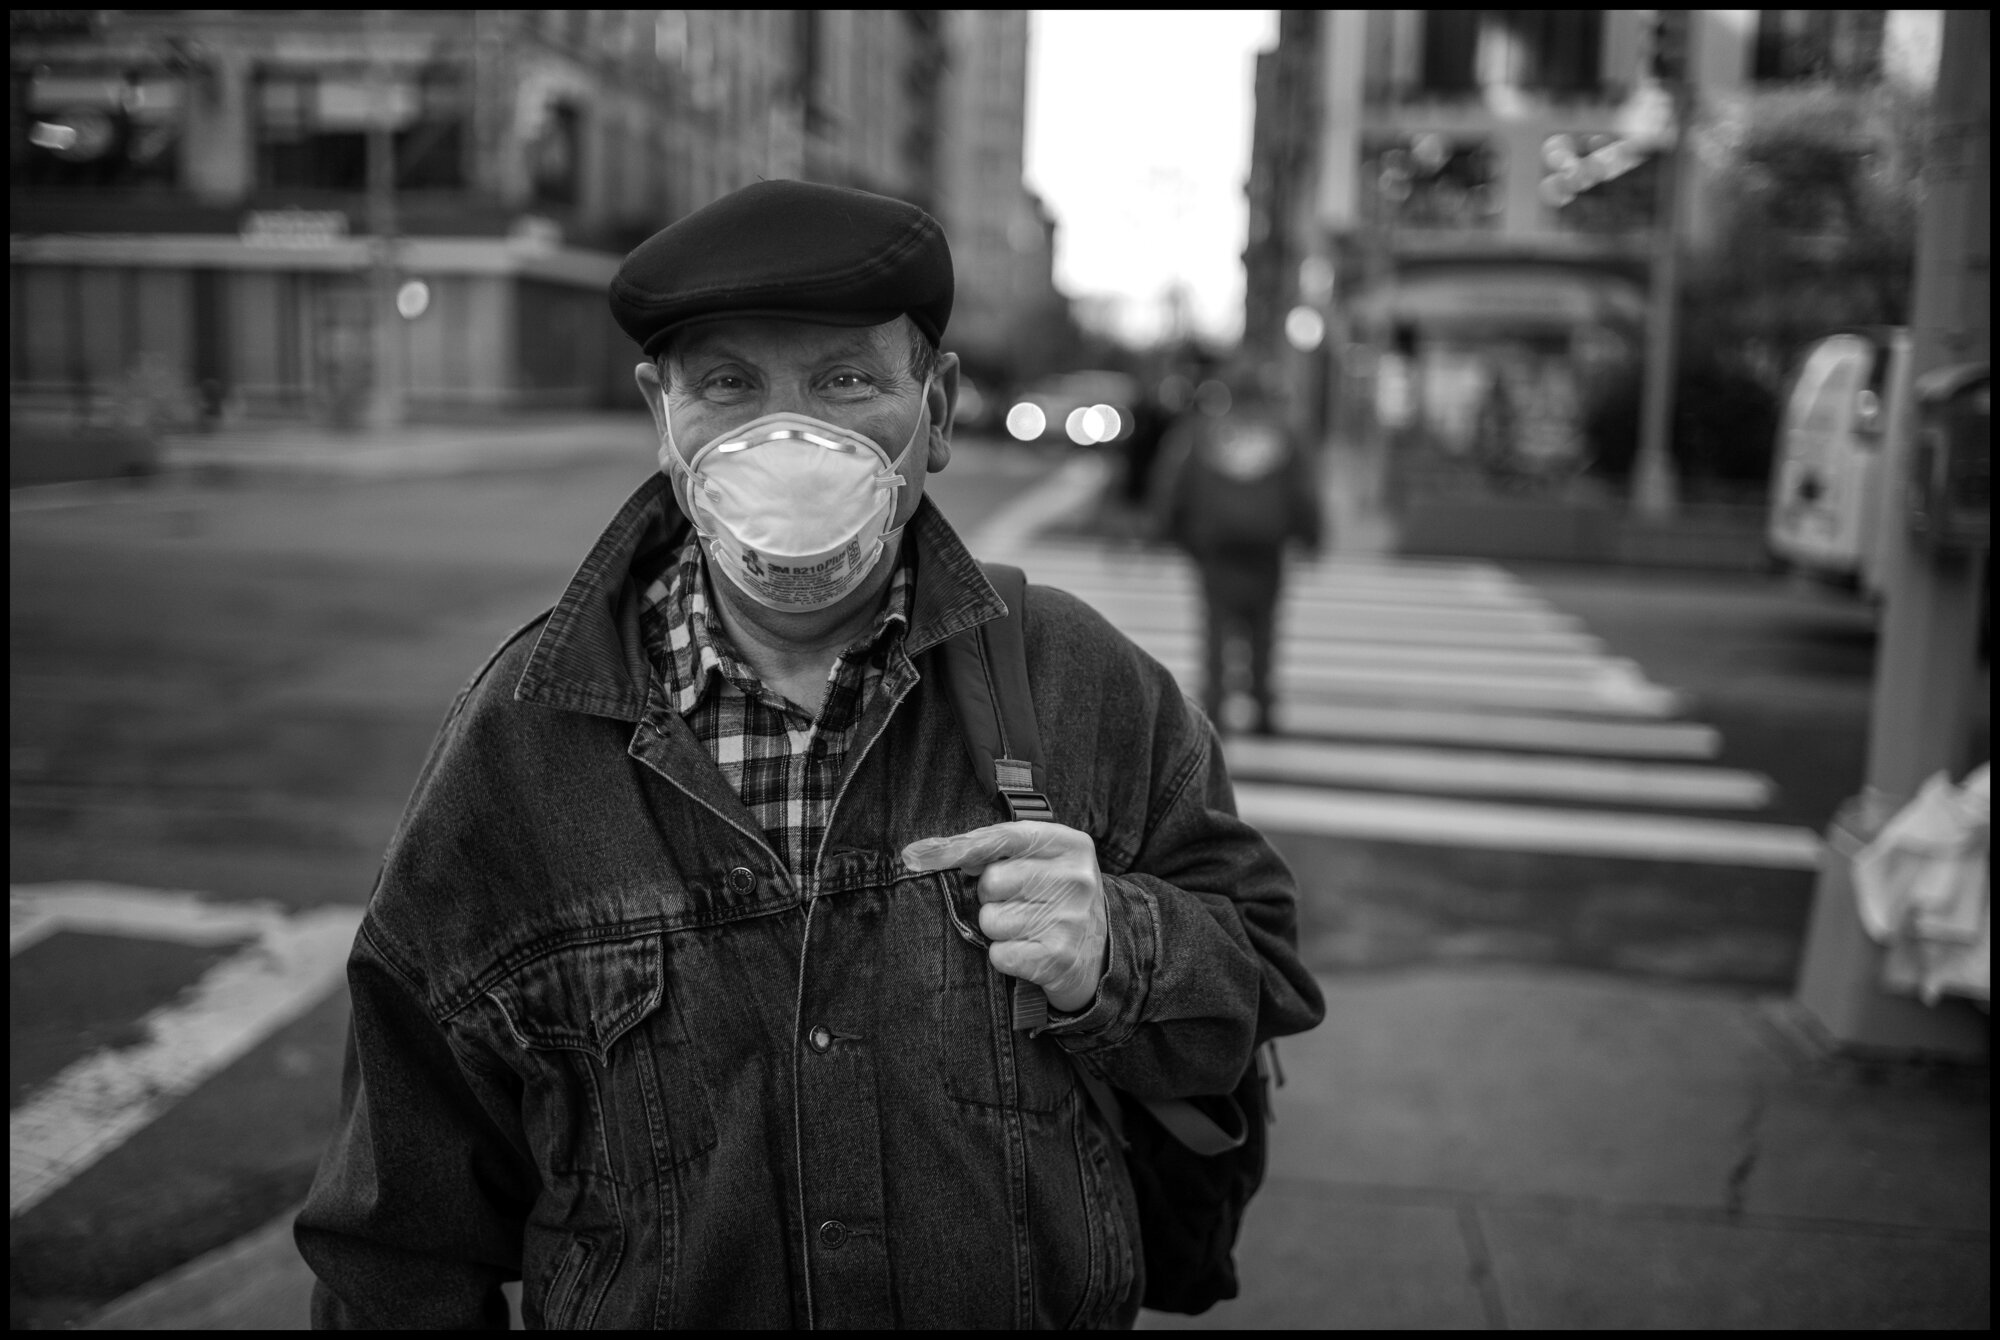  A portrait of a man walking across the street at 80thand Broadway. I asked him if I could photograph him and he said yes, but I don’t speak English.  March 24, 2020. © Peter Turnley.  ID# 03-015 